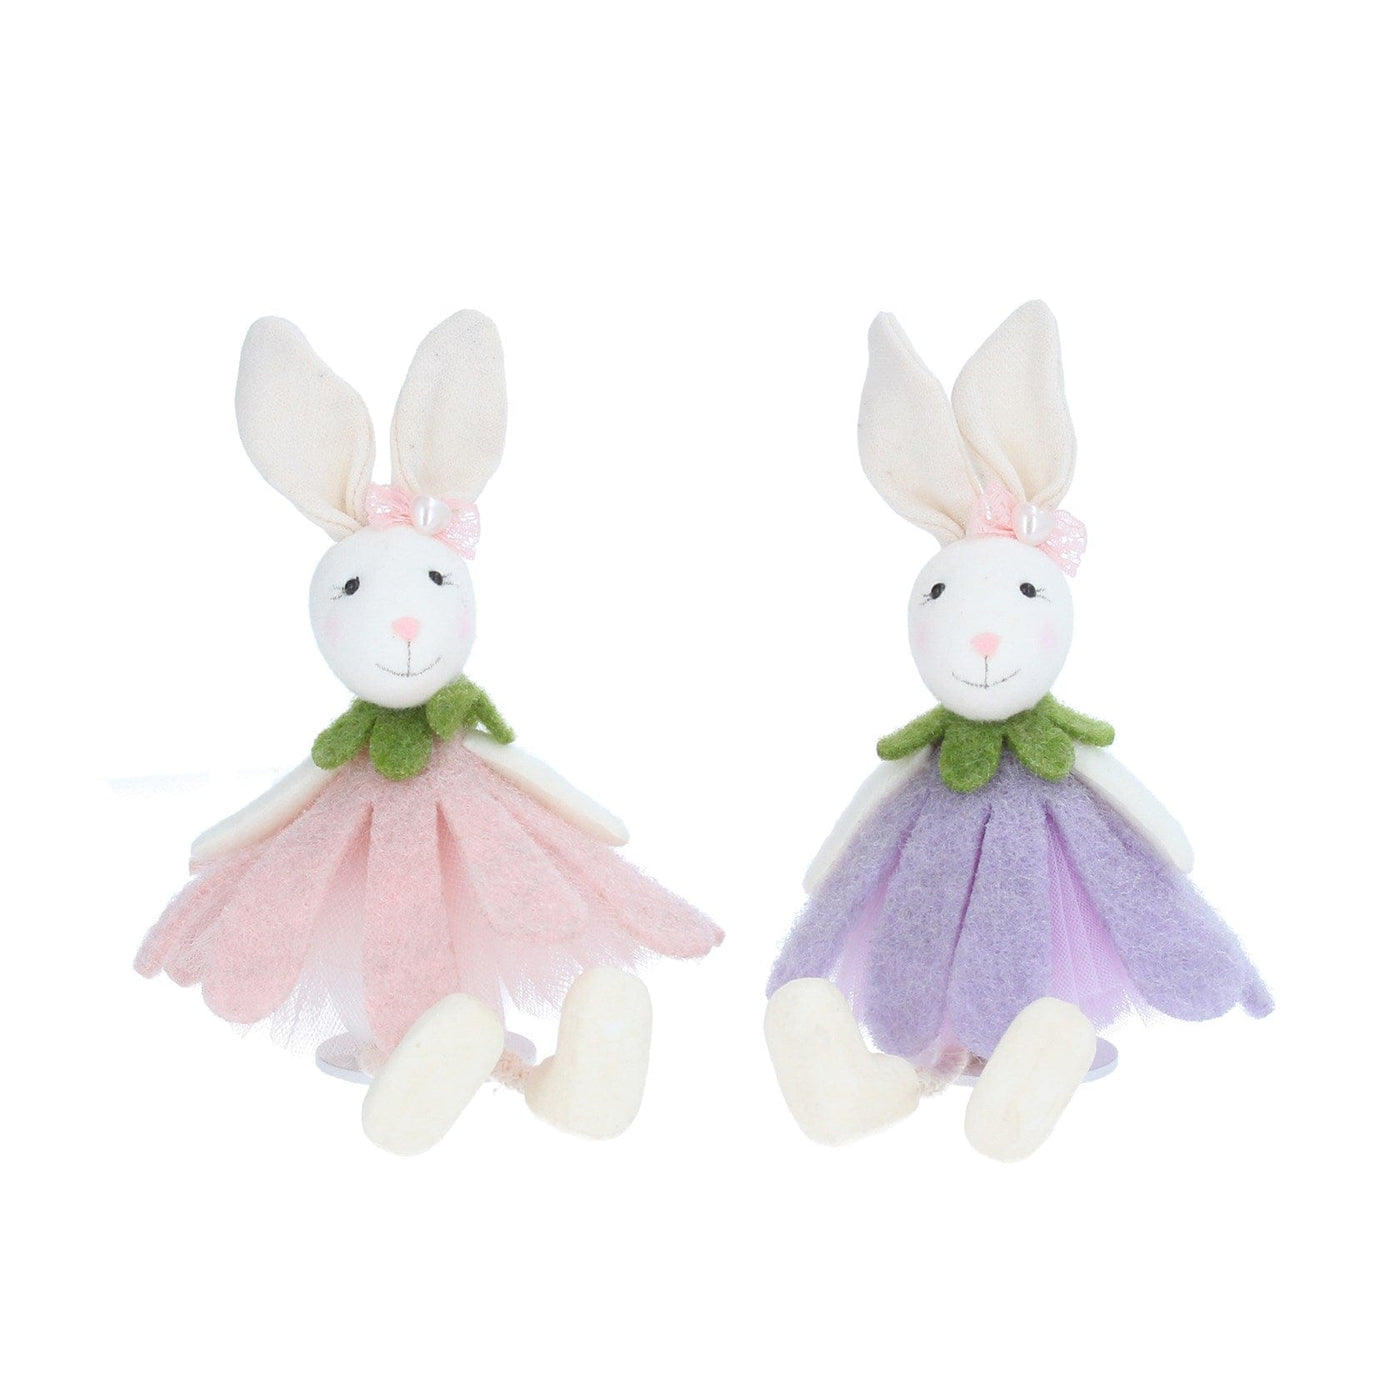 Gisela Graham Easter Easter Decorations Floral Fabric Rabbits Purple and Pink Easter Decorations